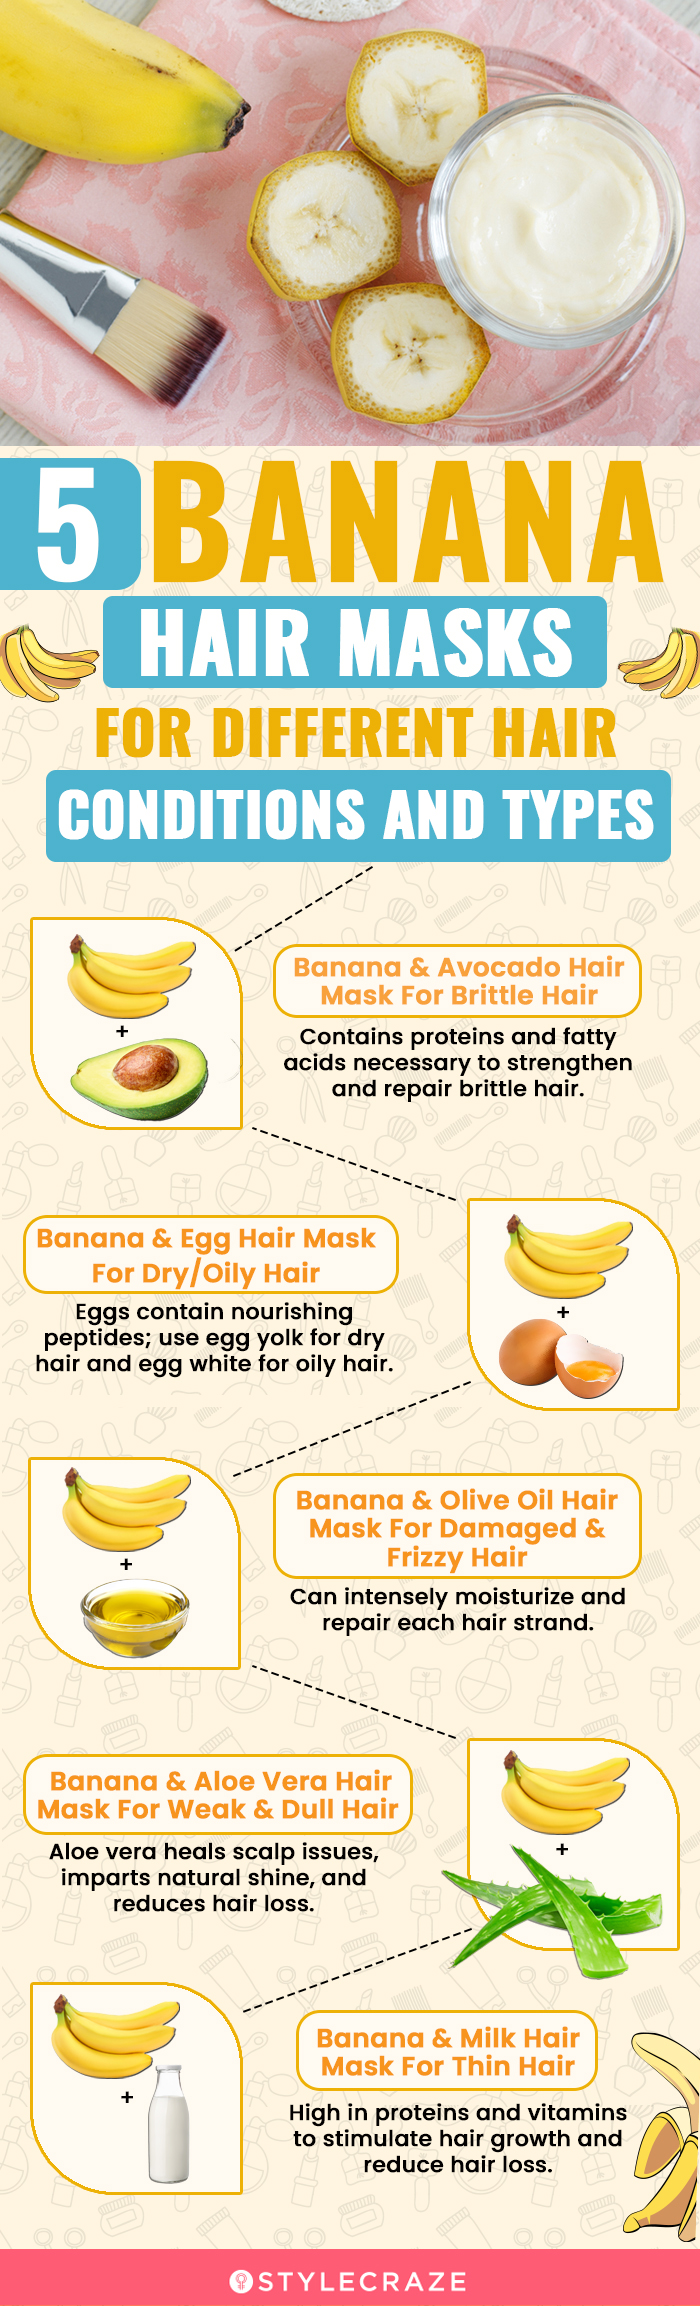 5 banana hair masks for different hair conditions and types [infographic]